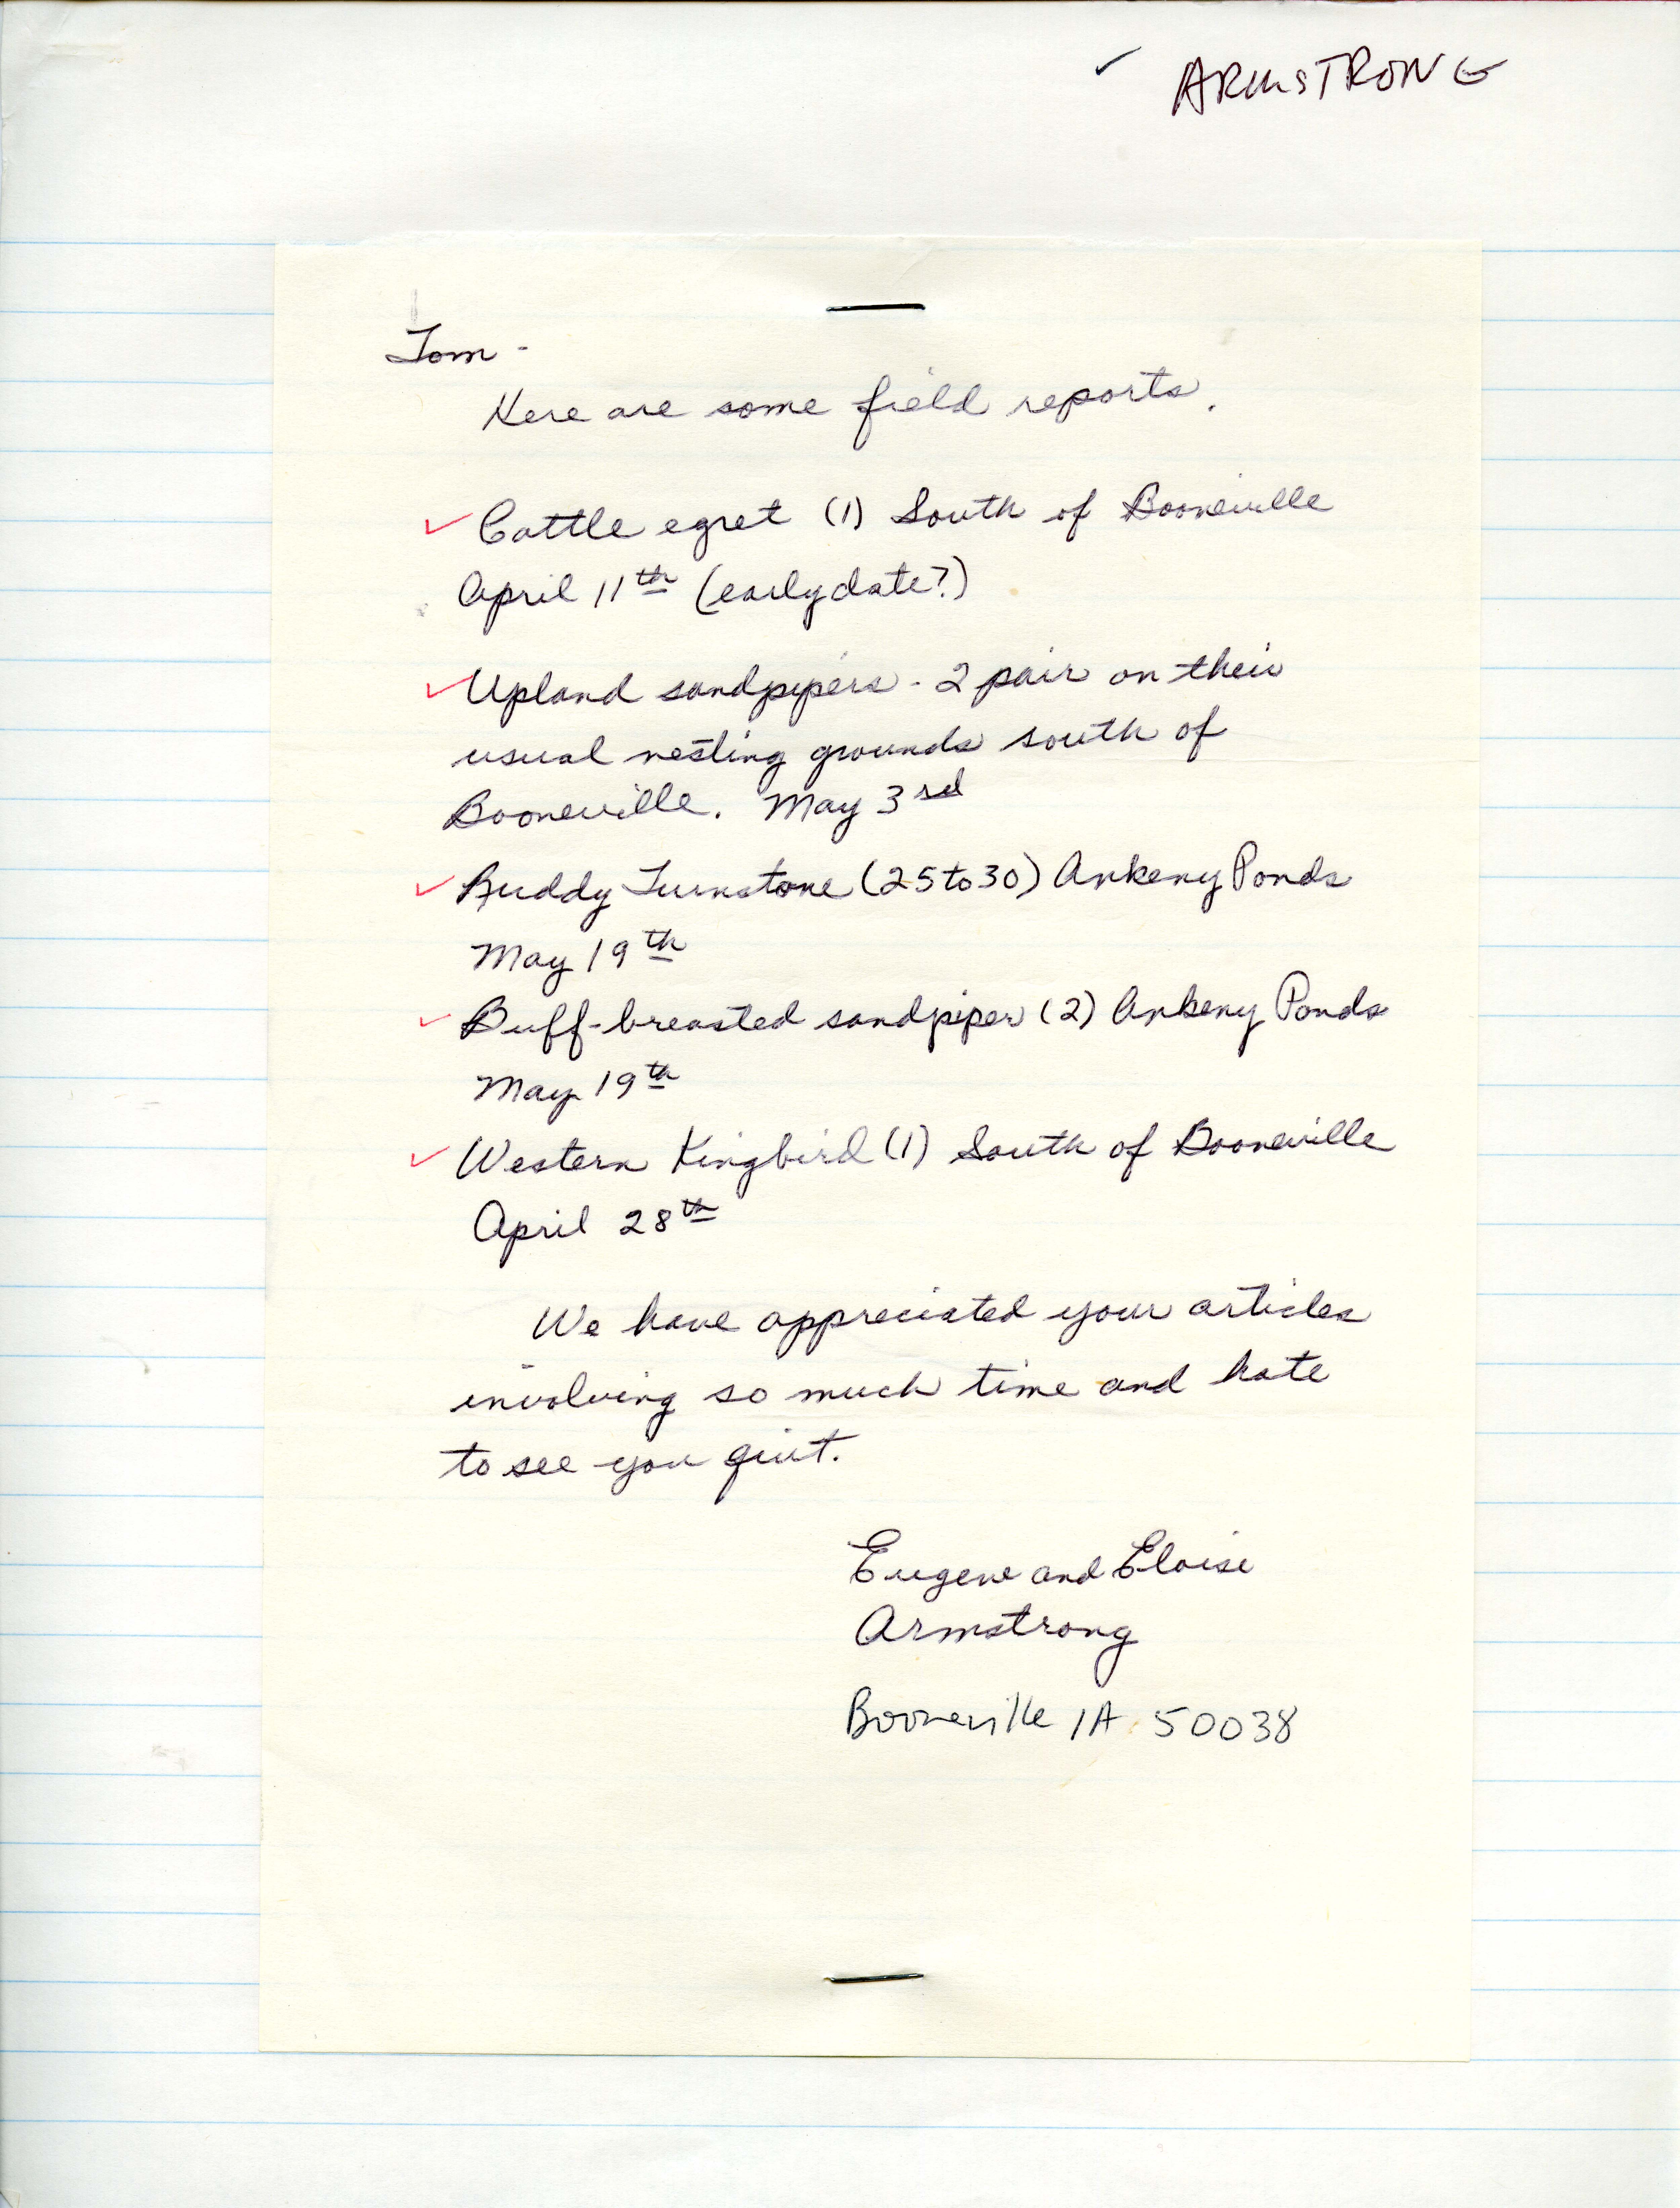 Eugene and Eloise Armstrong letter to Thomas H. Kent regarding bird sightings near Booneville, Iowa, spring 1984